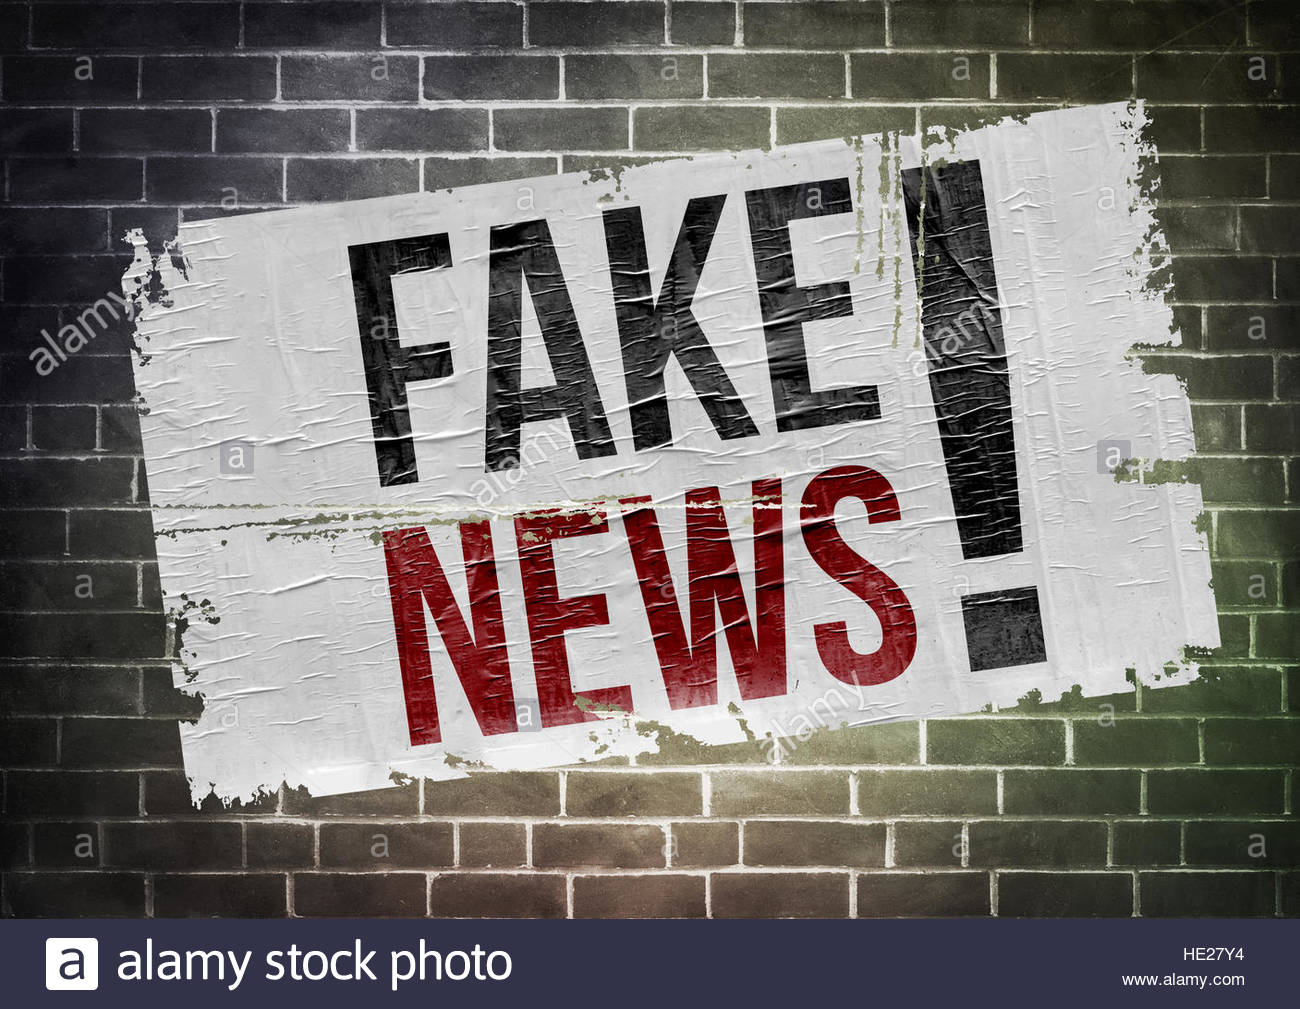 Image result for photos of fake news